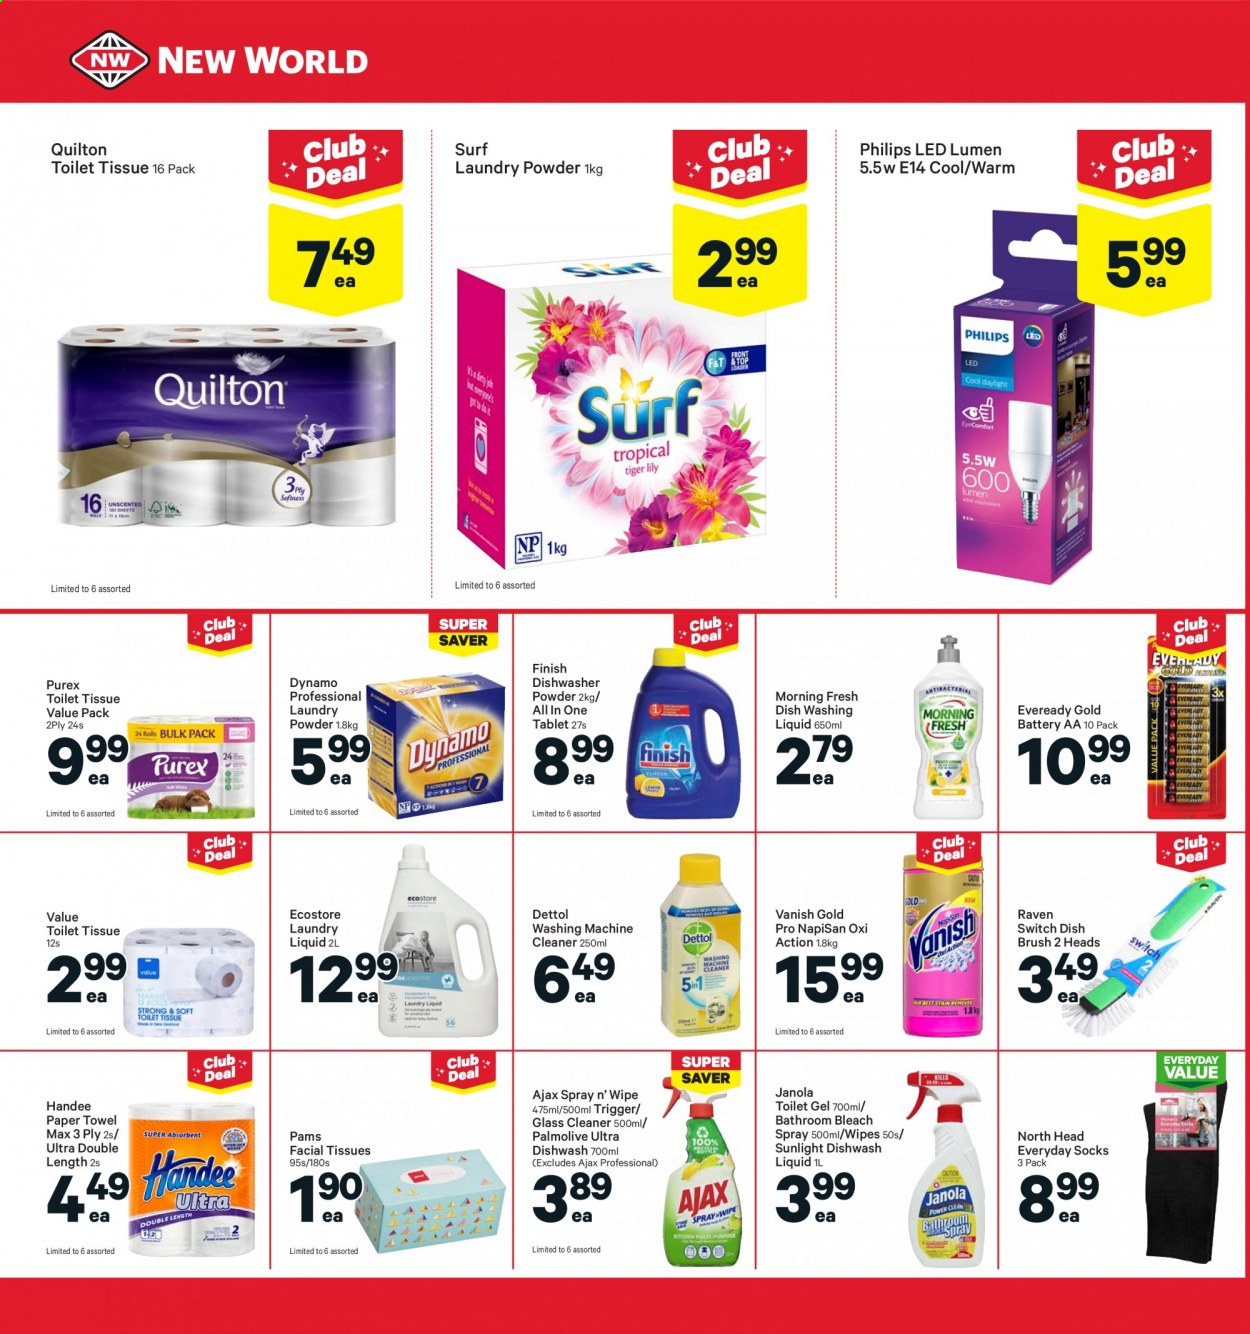 thumbnail - New World mailer - 19.07.2021 - 25.07.2021 - Sales products - wipes, Dettol, toilet paper, Handee, Quilton, paper towels, Palmolive, facial tissues, bleach. Page 32.